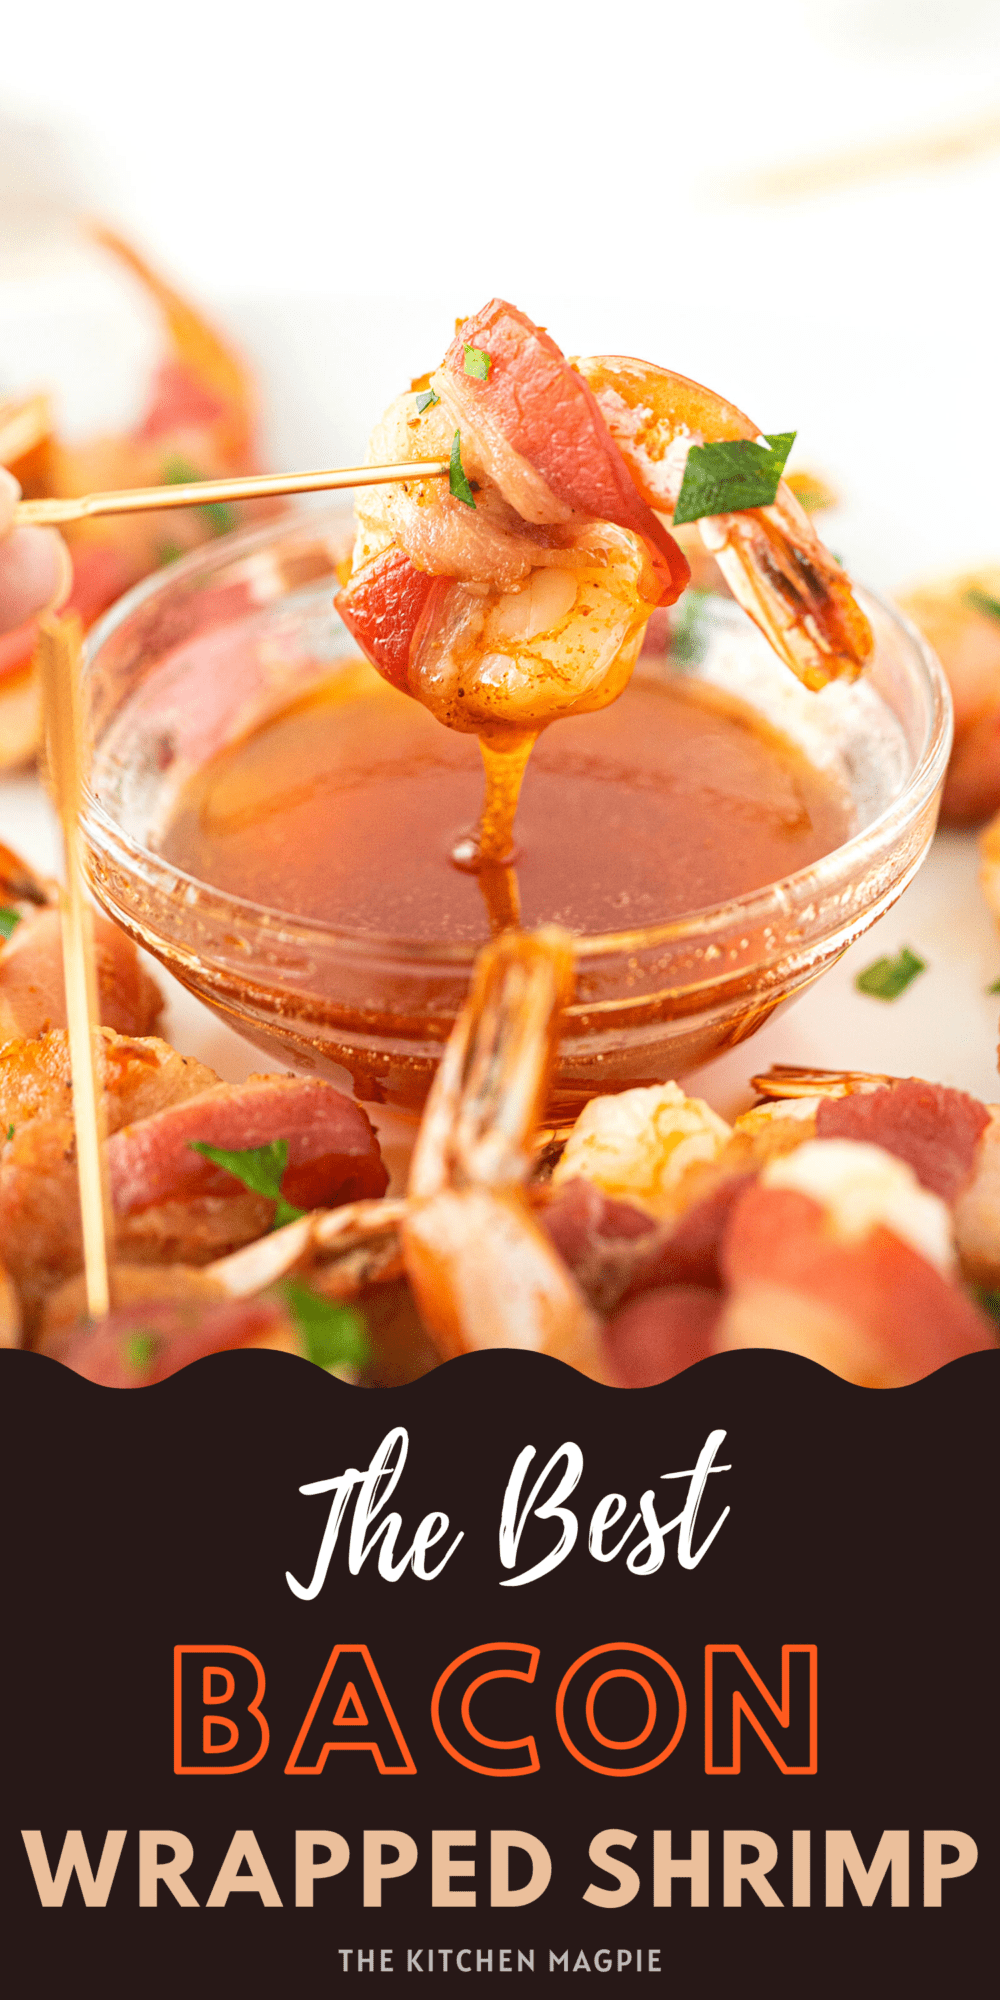 Seasoned shrimp are wrapped in bacon and cooked to perfection, then dipped into a hot, buttery Buffalo sauce for serving.